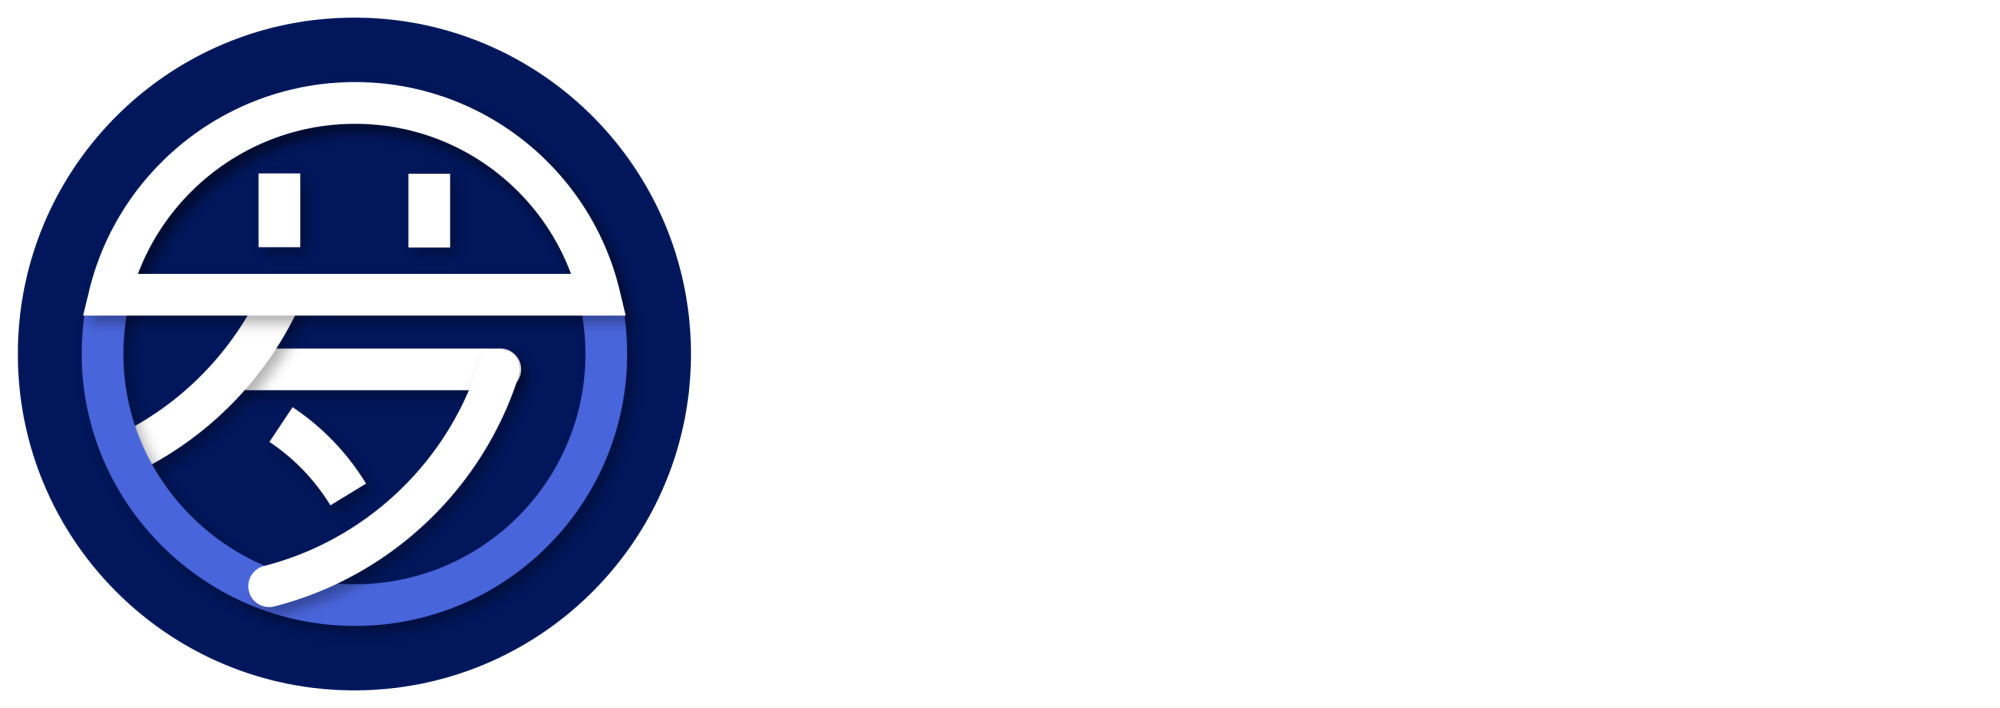 Logo and banner for Daily Challenge with Po-Shen Loh